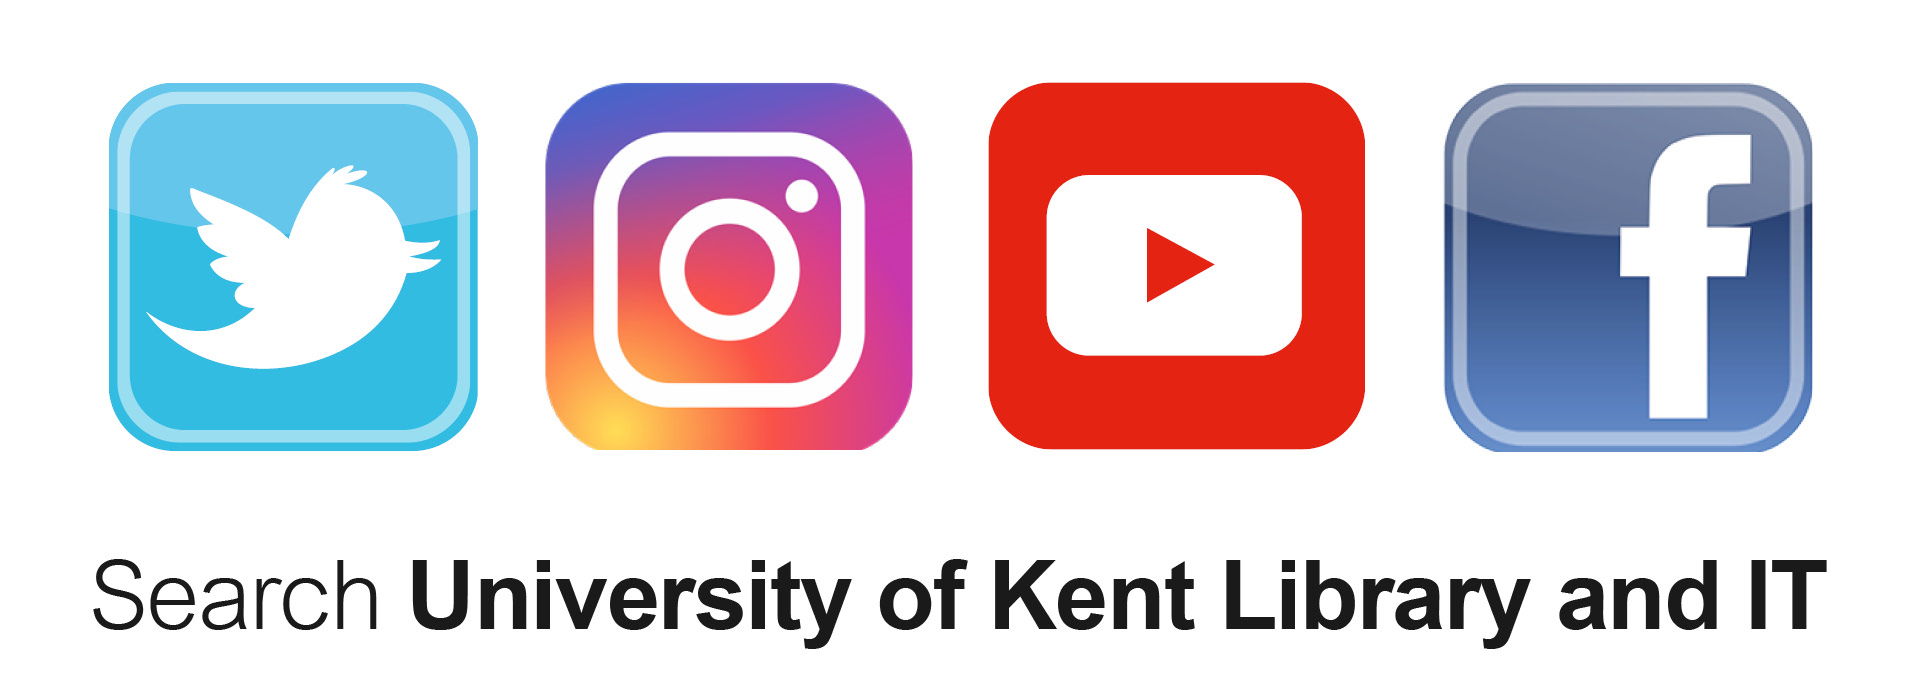 Search for University of Kent Library and IT on Twitter, Instagram, YouTube and Facebook